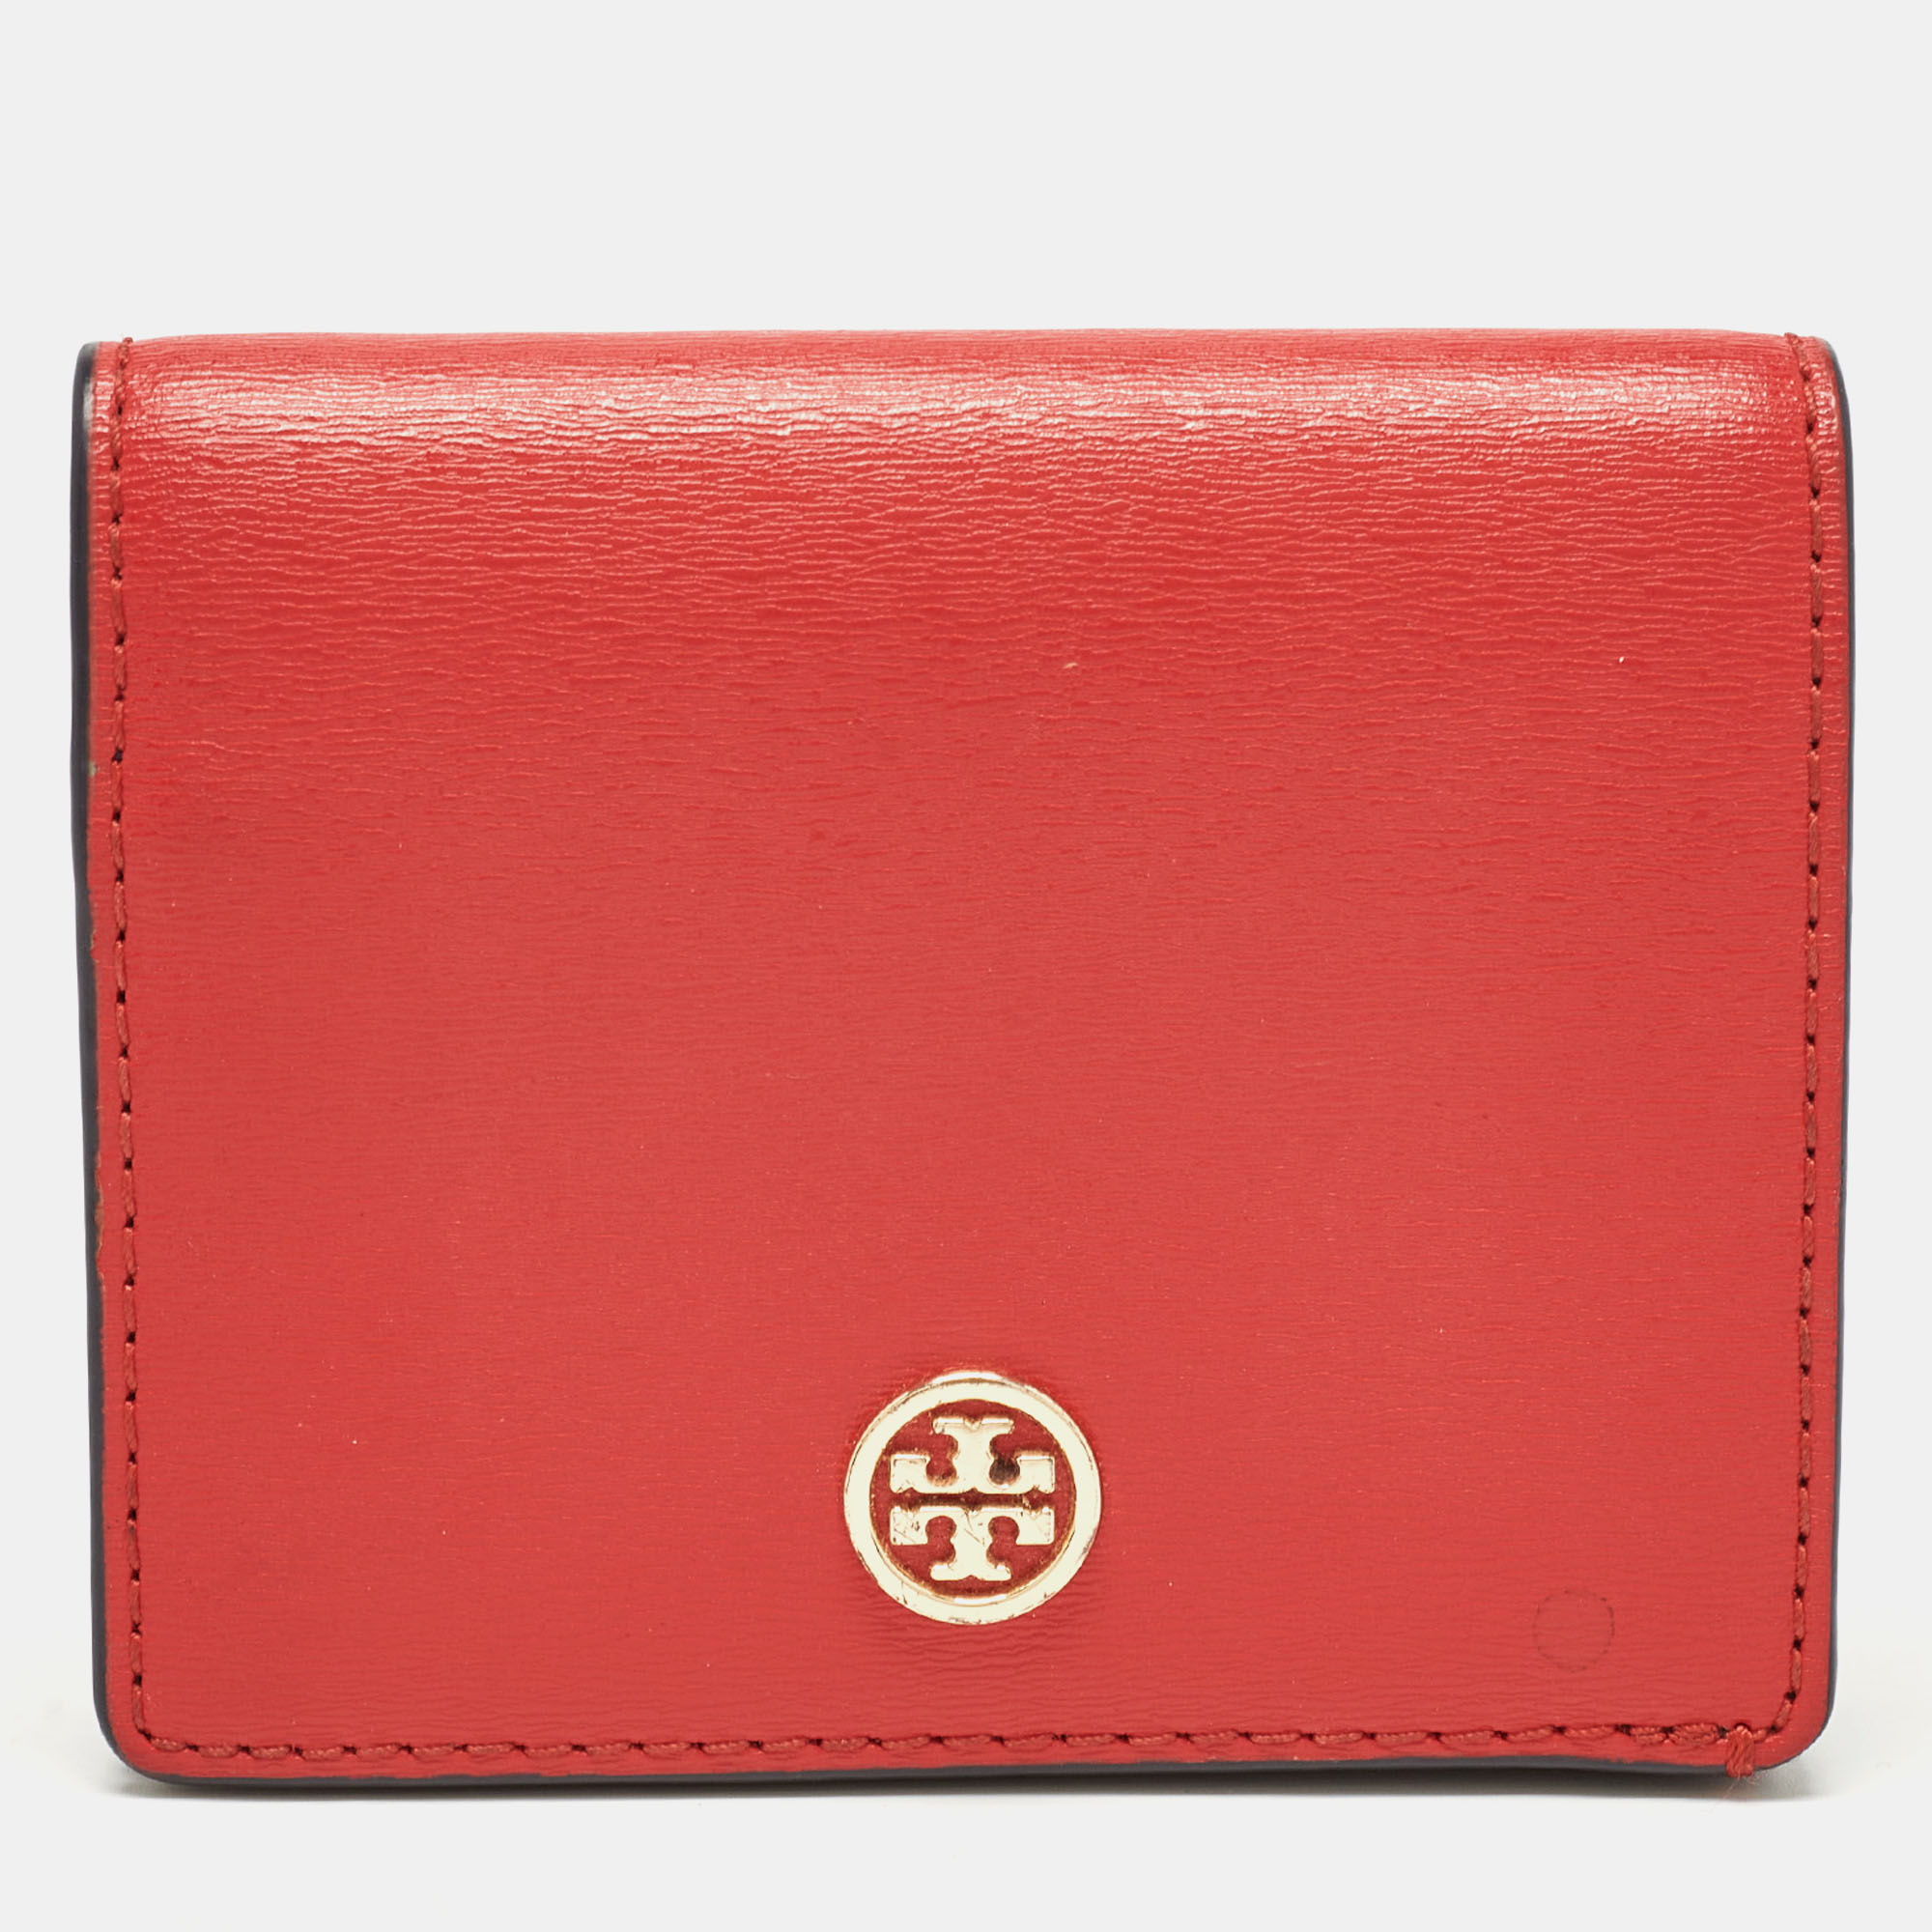 Add this beautiful Robinson wallet in your collection. Crafted from leather this Tory Burch wallet comes with a nylon lined interior housing open compartments one zipped pocket and multiple card slots.